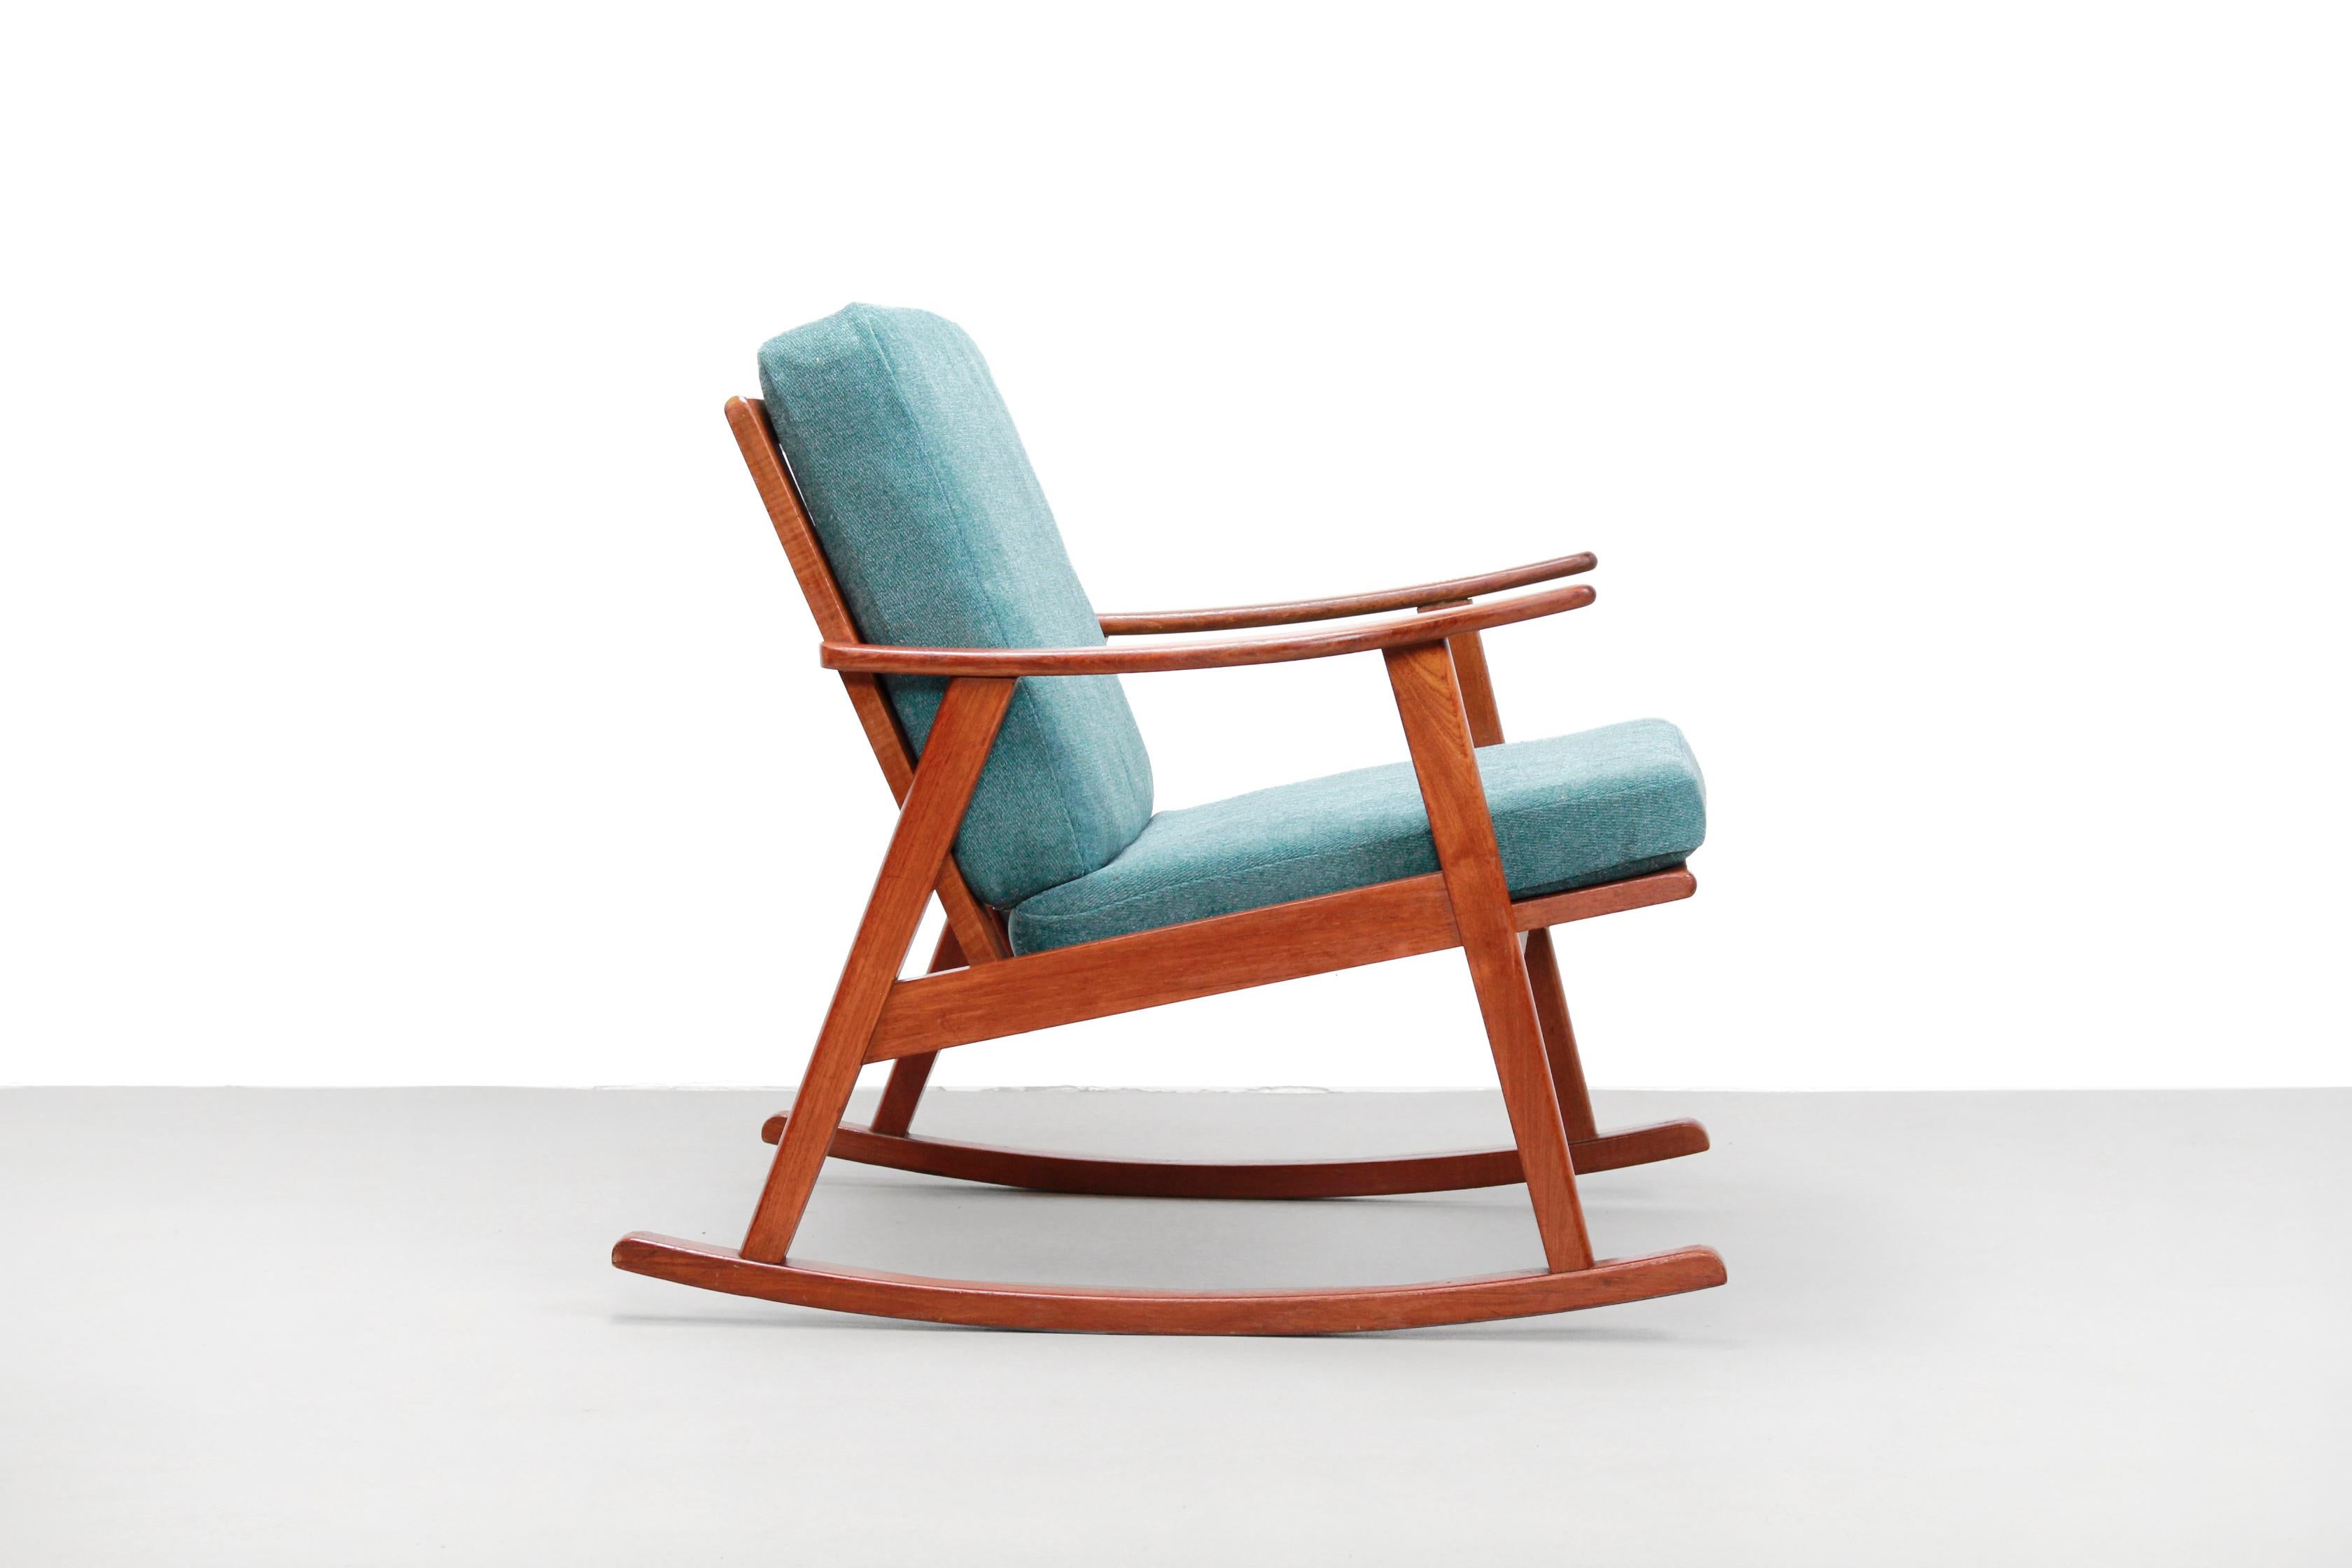 Teak wooden rocking armchair of Danish origin. This rocking chair is made of solid teak. The cushions are provided with a new fabric. Given that the chair is made of solid teak, and how sturdy it is after 60 years, this must be a chair that came